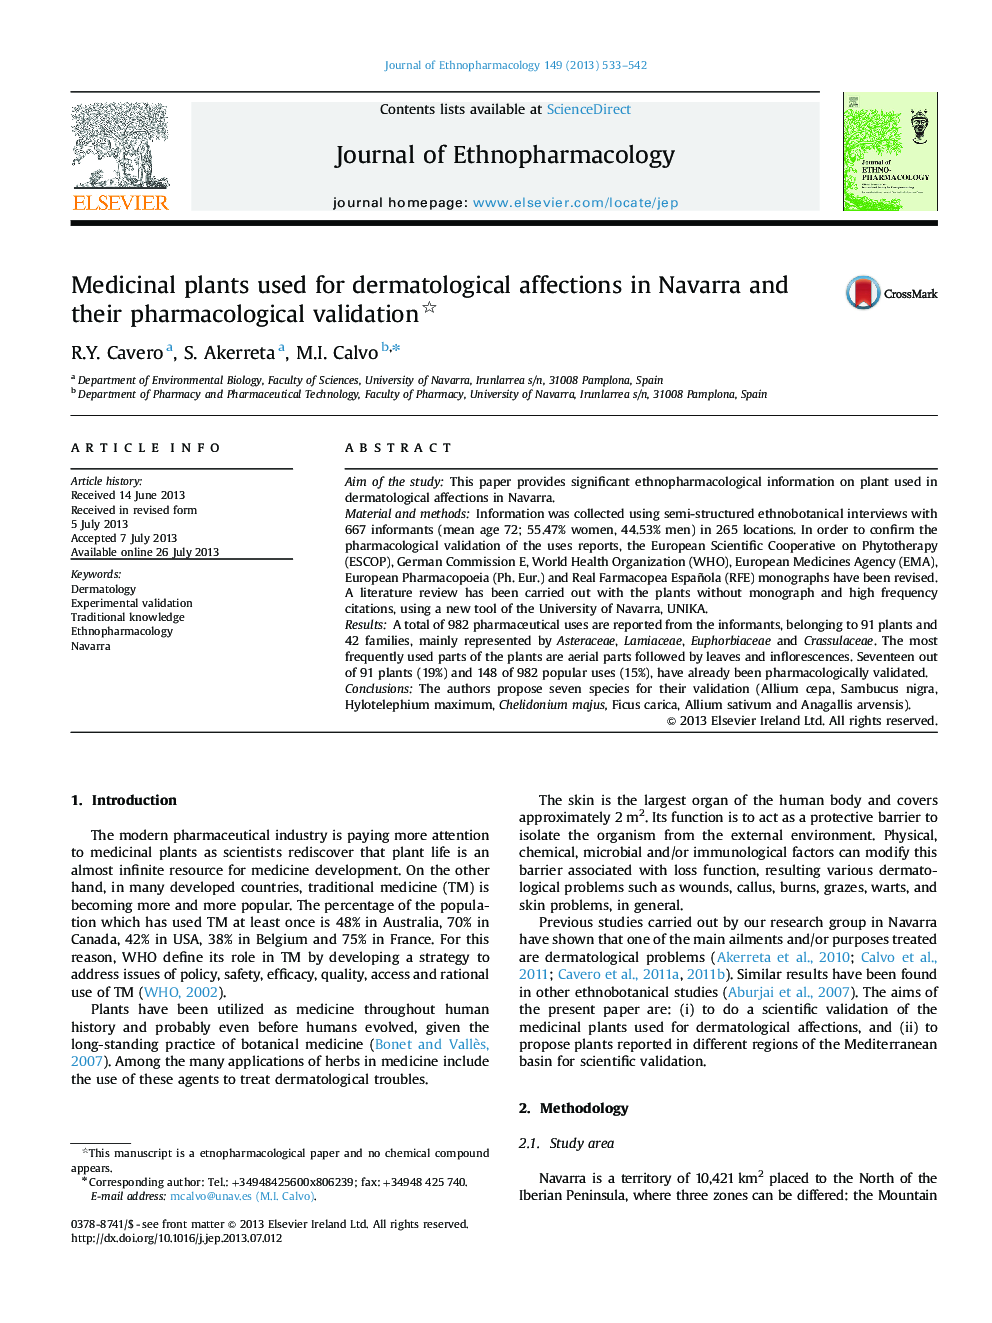 Medicinal plants used for dermatological affections in Navarra and their pharmacological validation